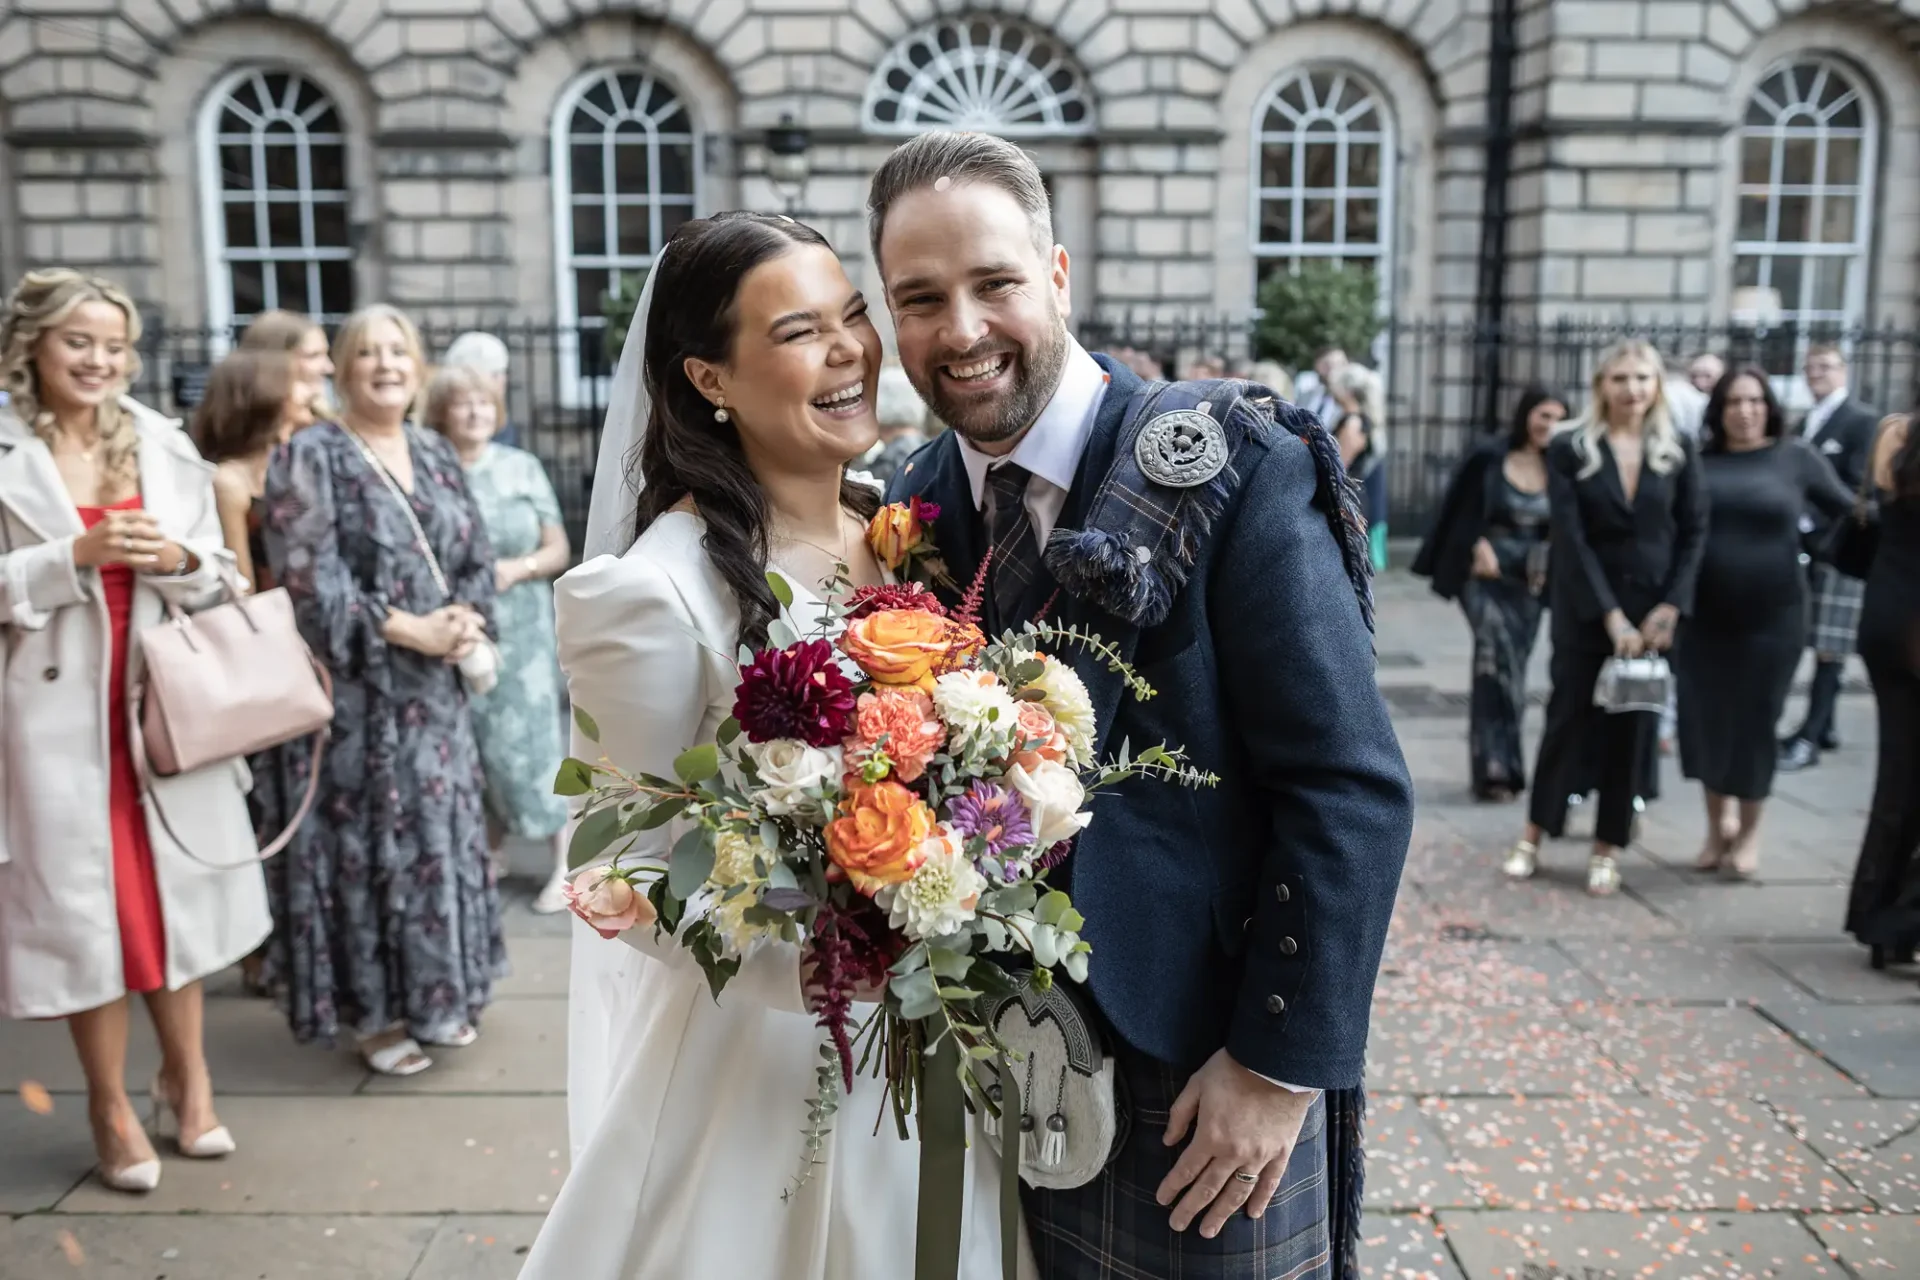 A newlywed couple smiling outside a building, with the bride holding a bouquet and the groom wearing a kilt, surrounded by guests.